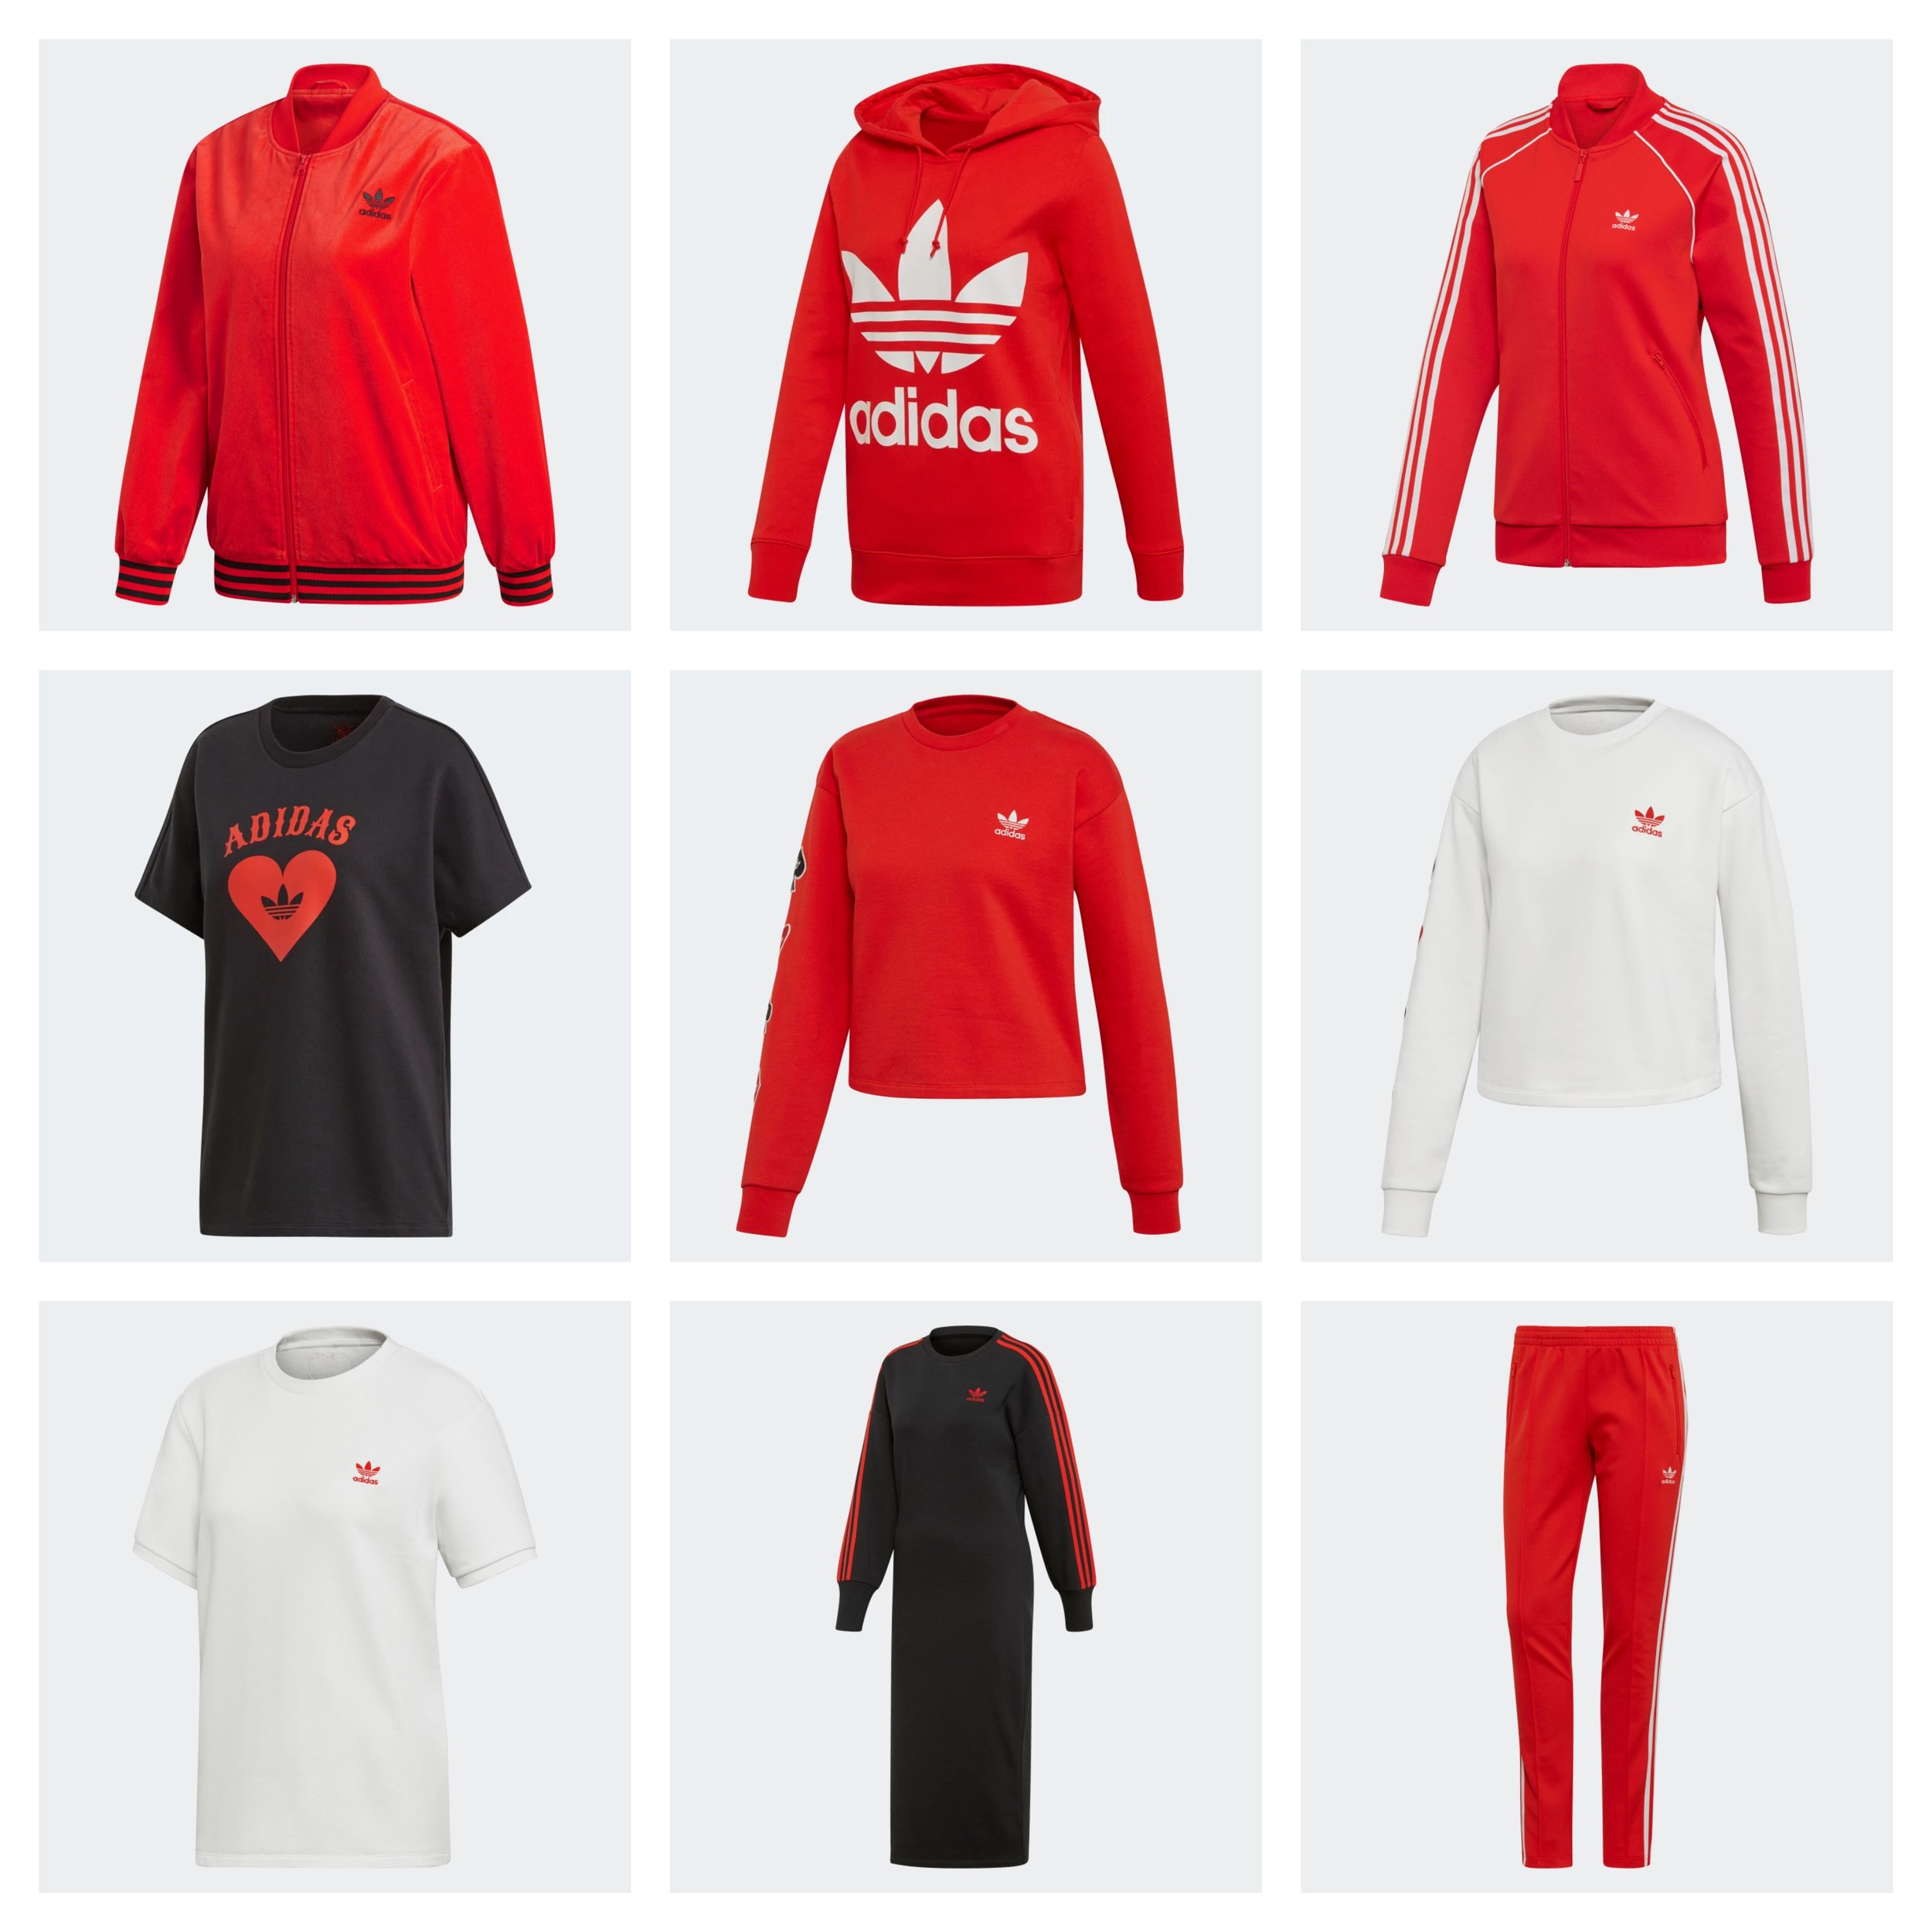 adidas v day collection